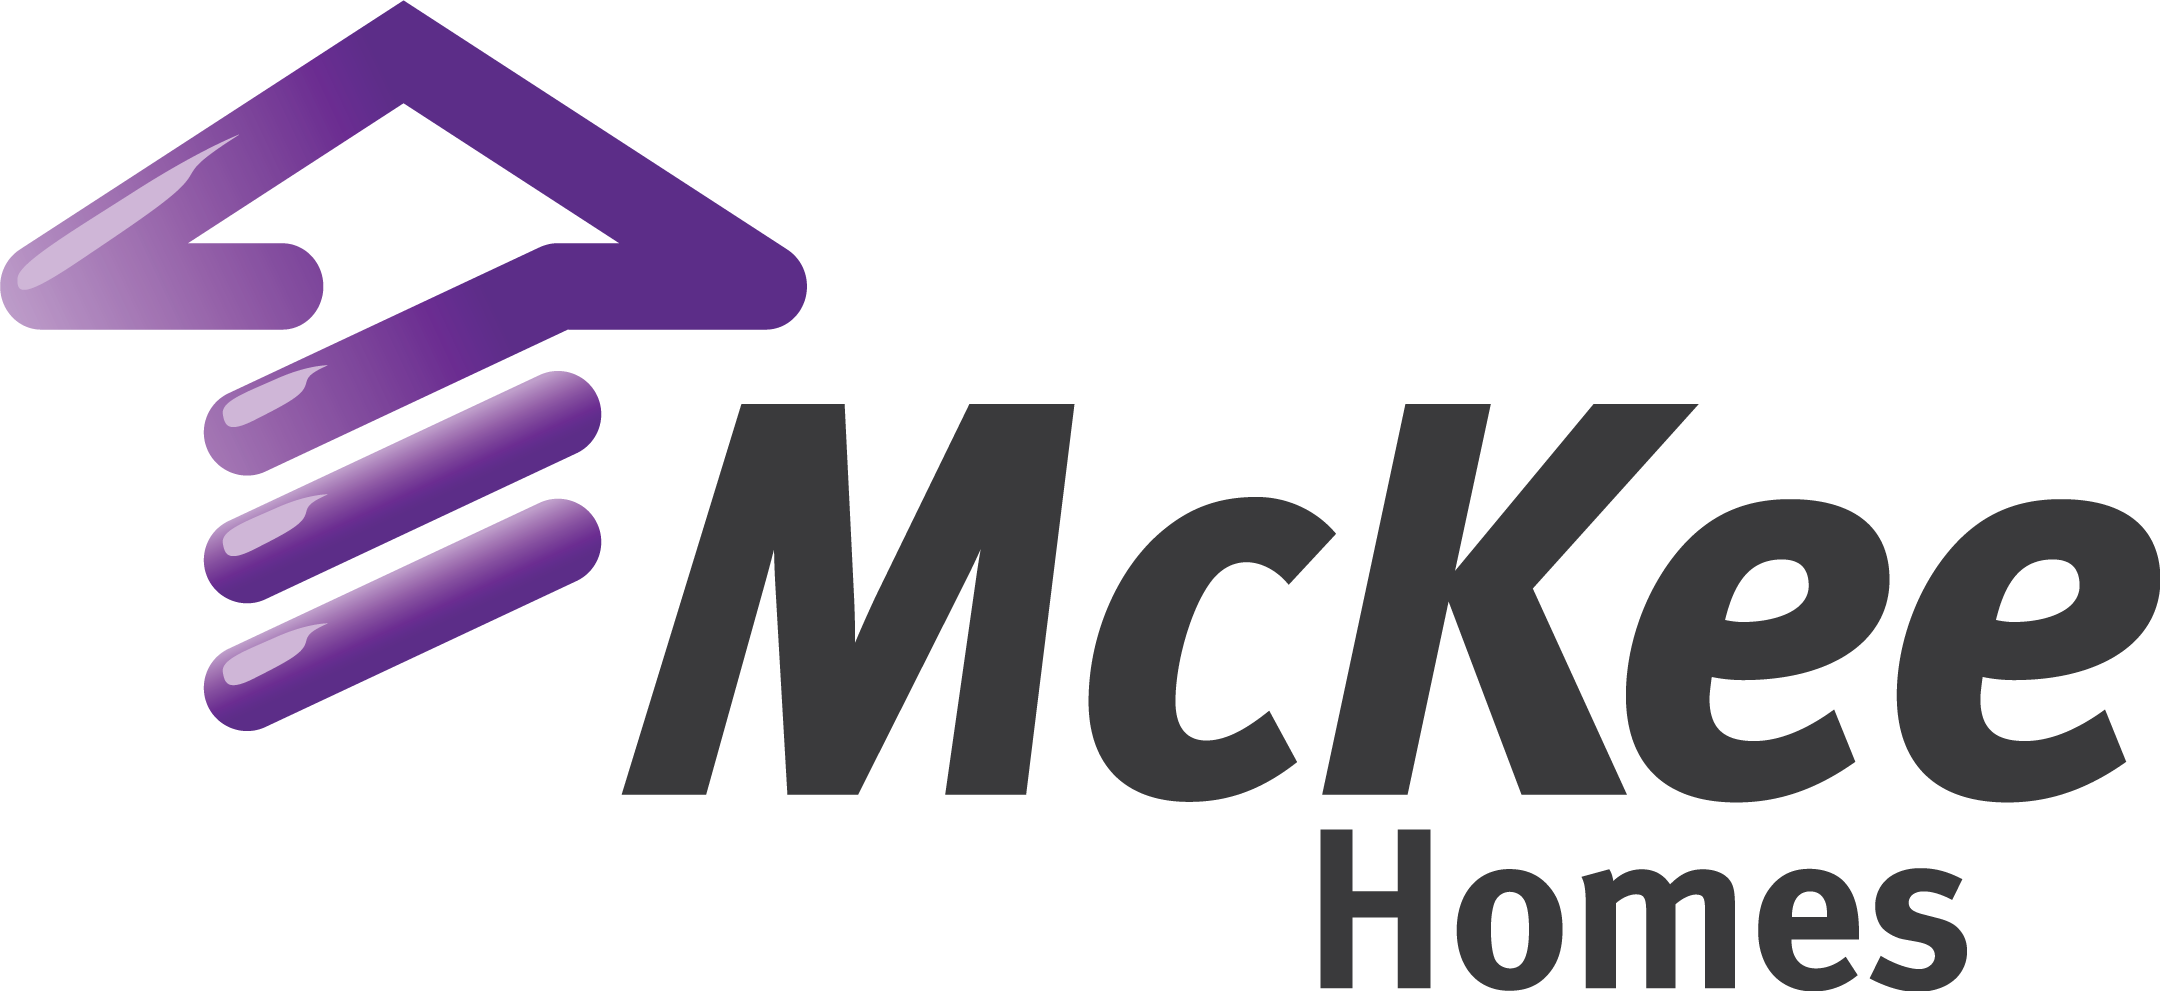 A. McKee Homes (Presenting)